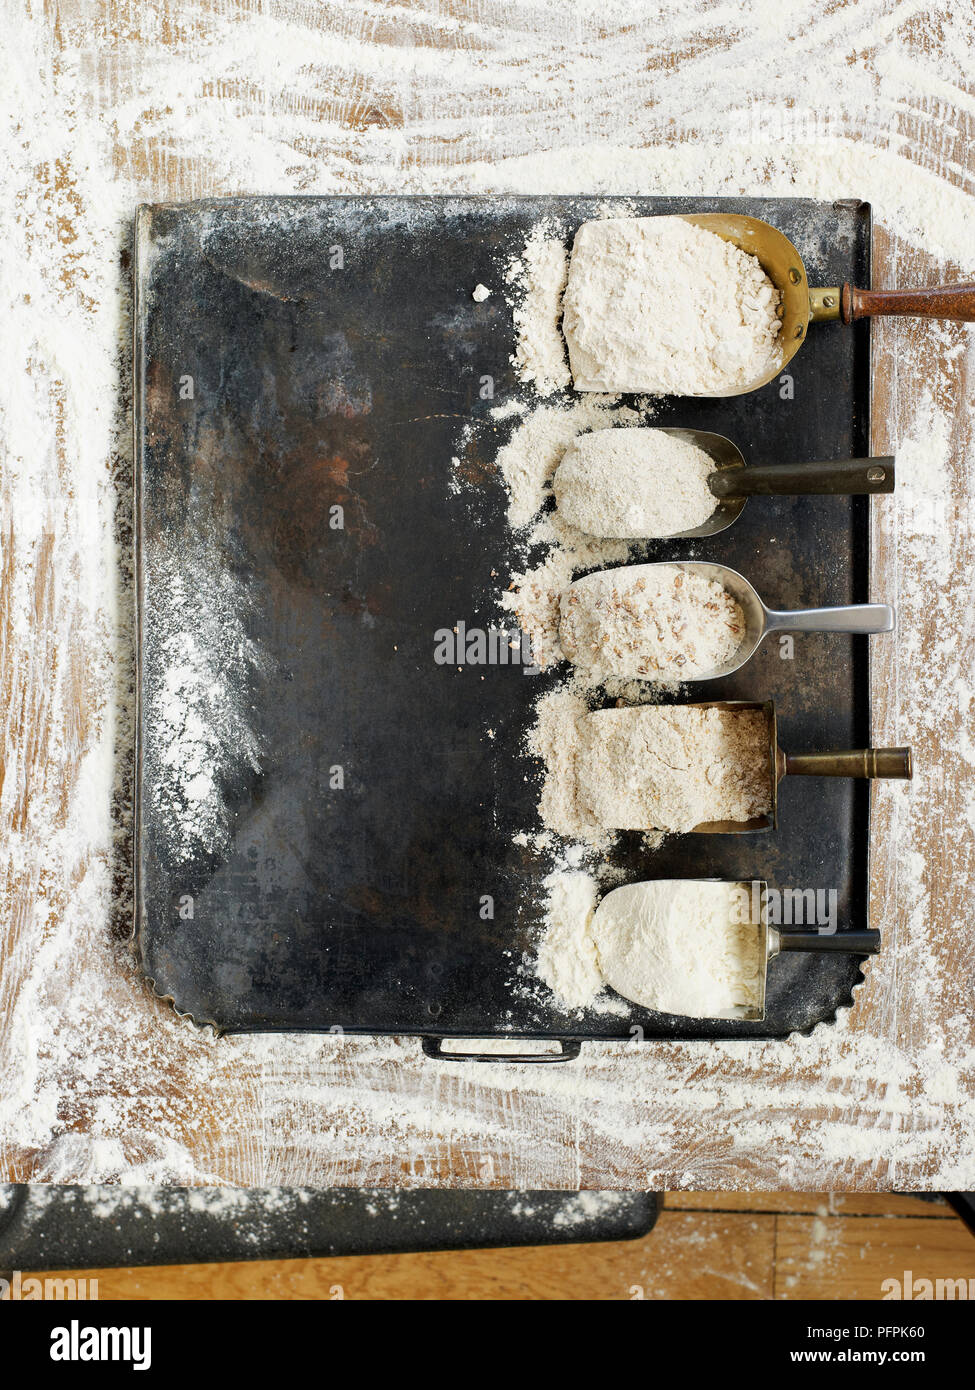 Row of scoops containing different types of flour, spelt, rye, granary, wholemeal, and white, on floured surface Stock Photo